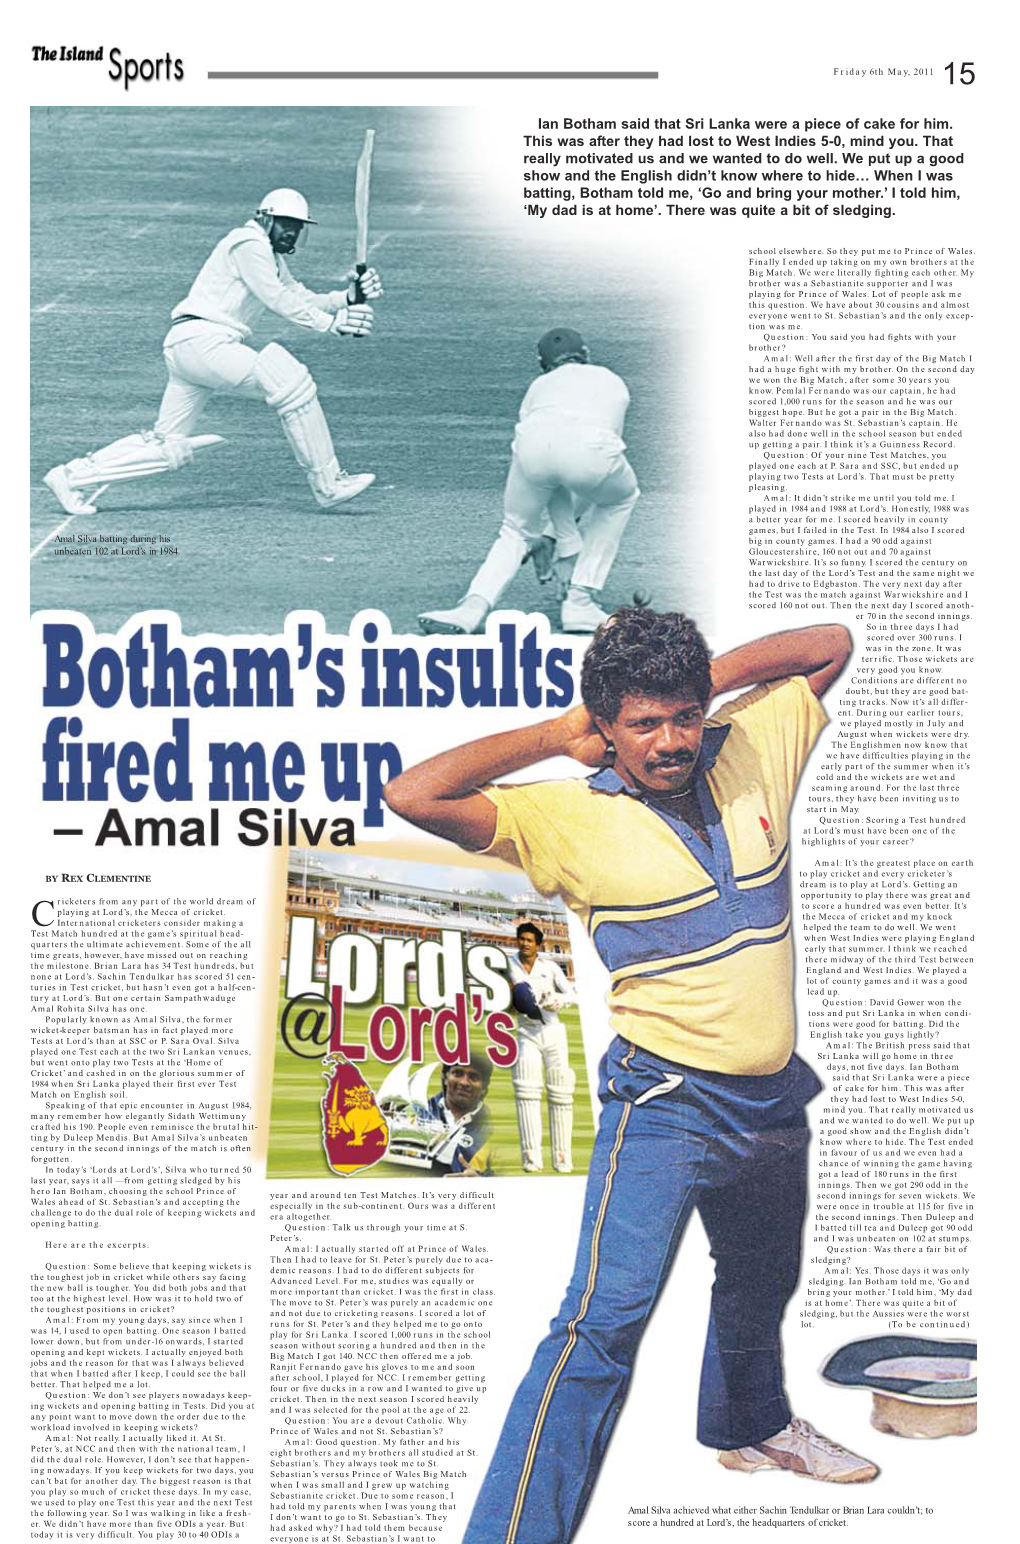 Ian Botham Said That Sri Lanka Were a Piece of Cake for Him. This Was After They Had Lost to West Indies 5-0, Mind You